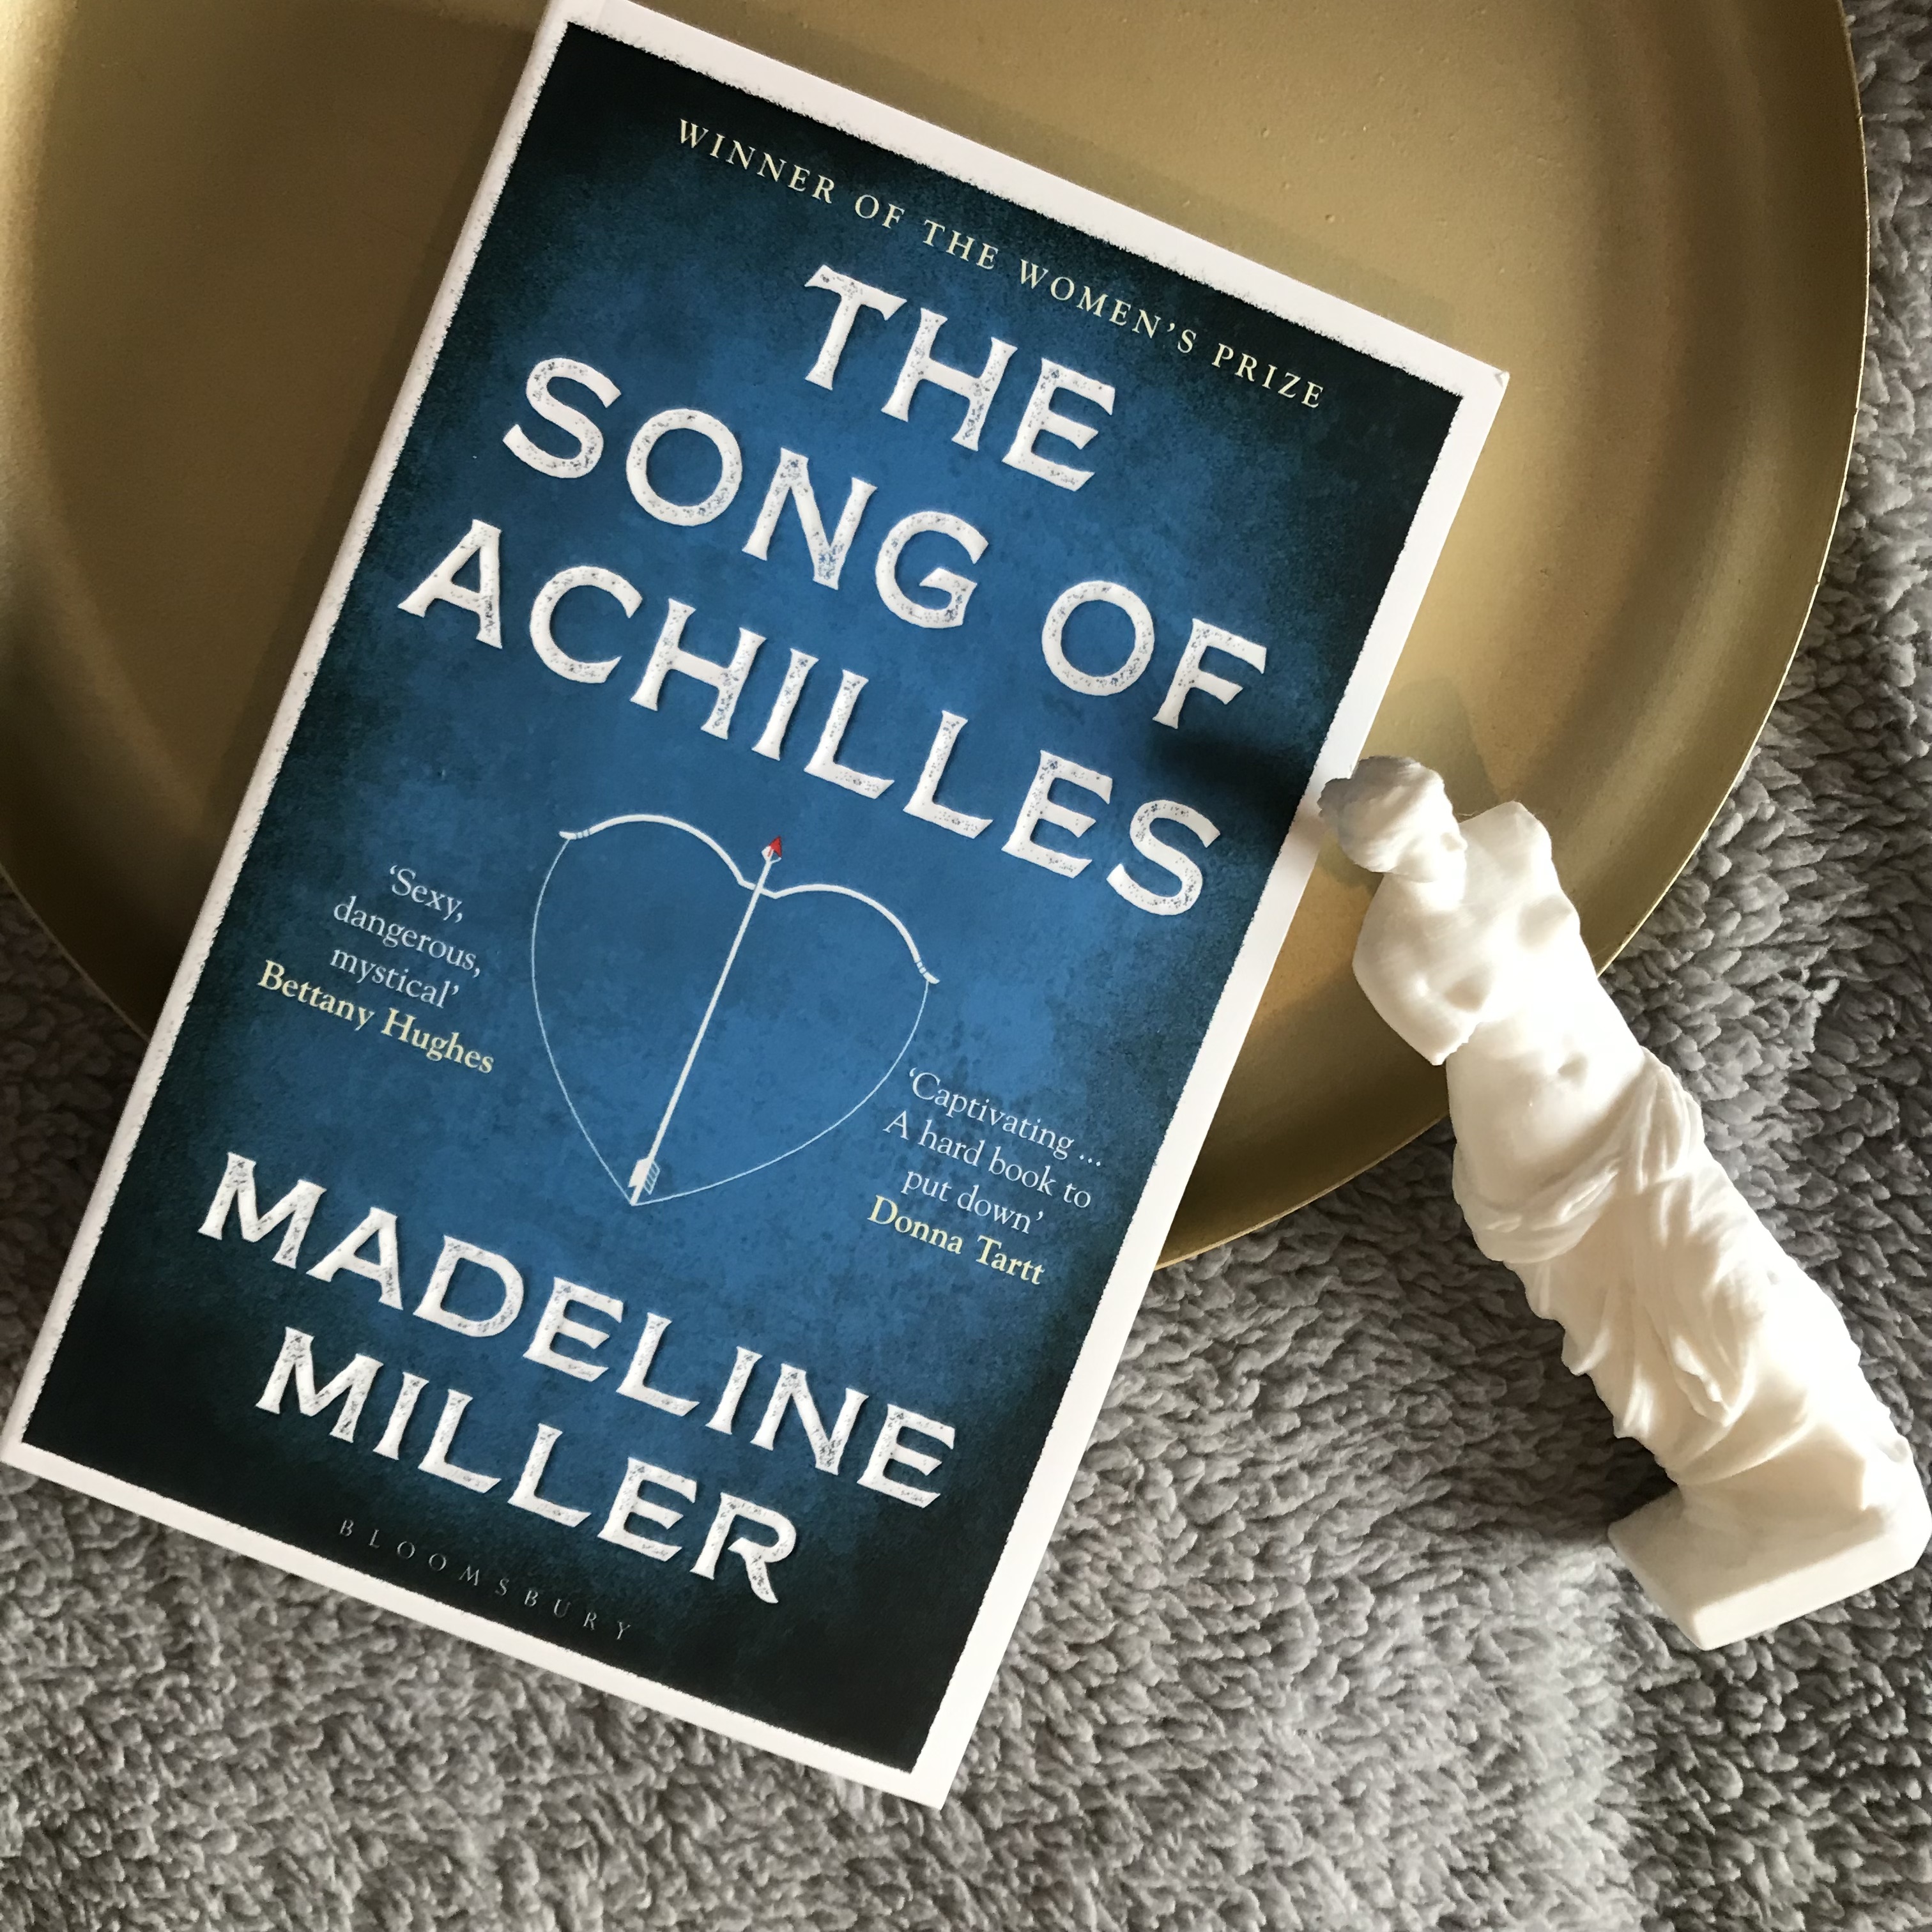 A photo of The Song of Achilles by Madeline Miller, half on a gold, circular tray, and half on a fluffy, light grey duvet. The book is diagonal, with the top facing the top right corner of the photo, and the bottom facing the bottom left corner of the photo. Next to the book, on the right, is a small, white Venus de Milo staue.